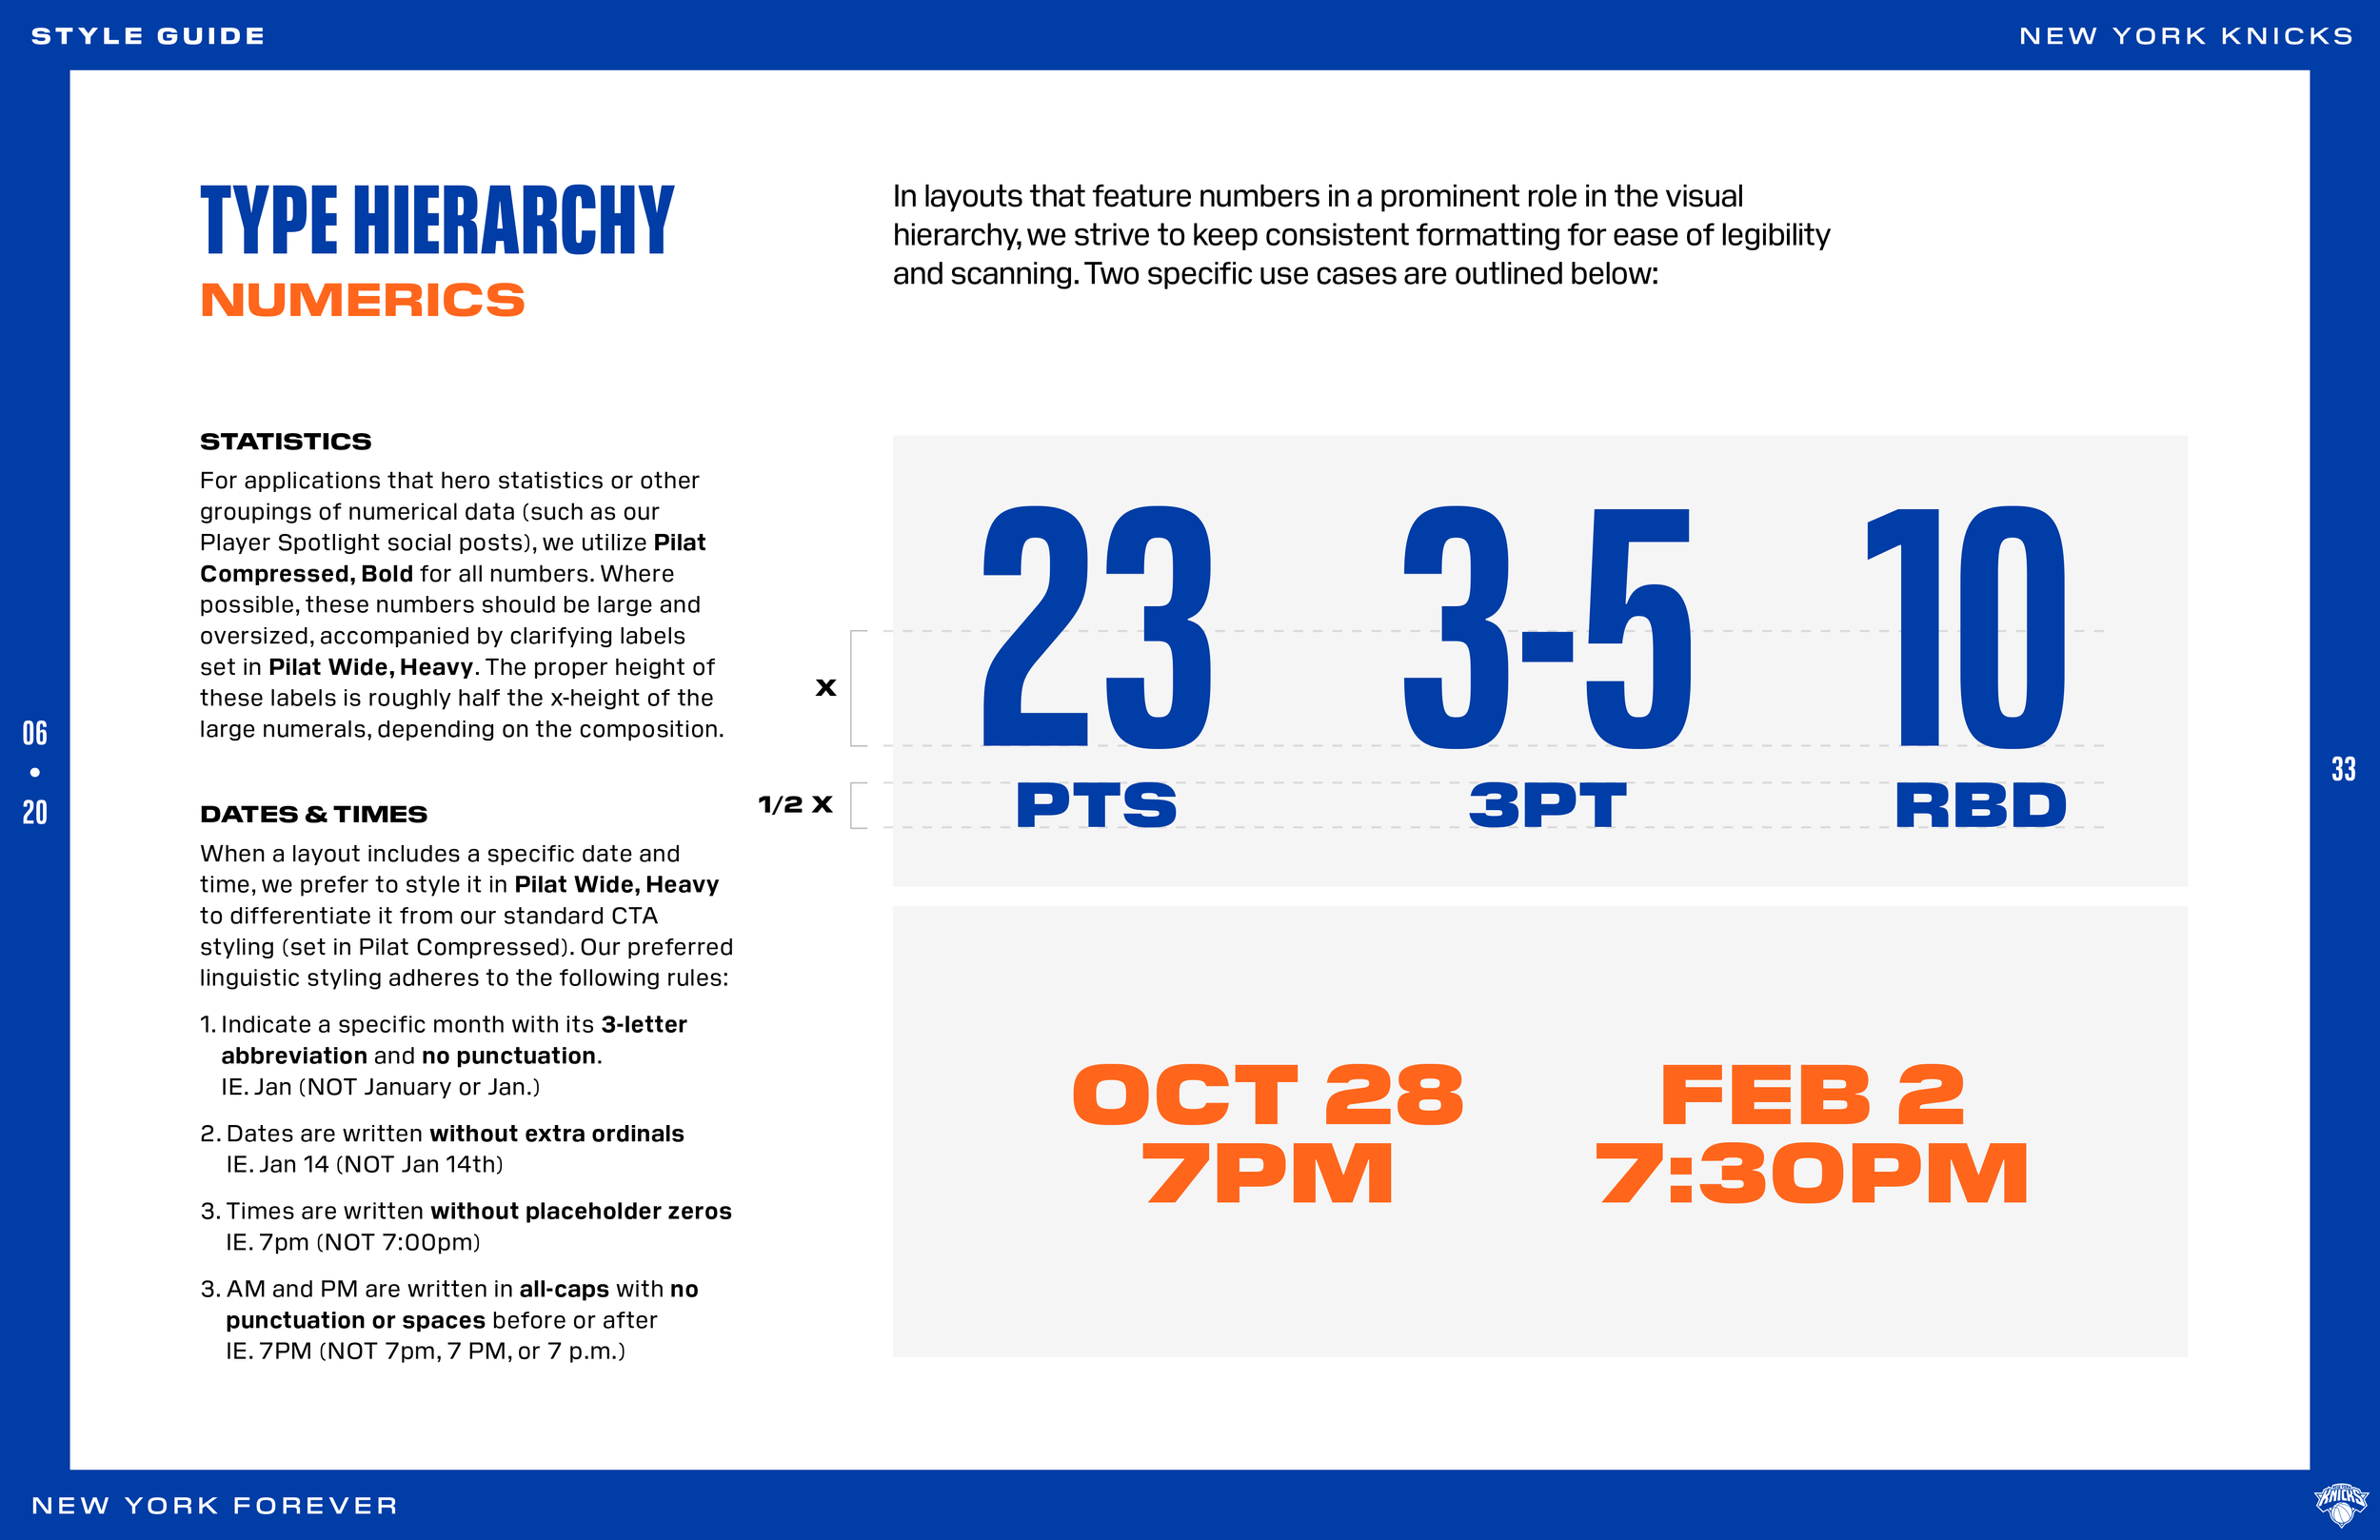 Pages from KNICKS_StyleGuide_062420 33.png